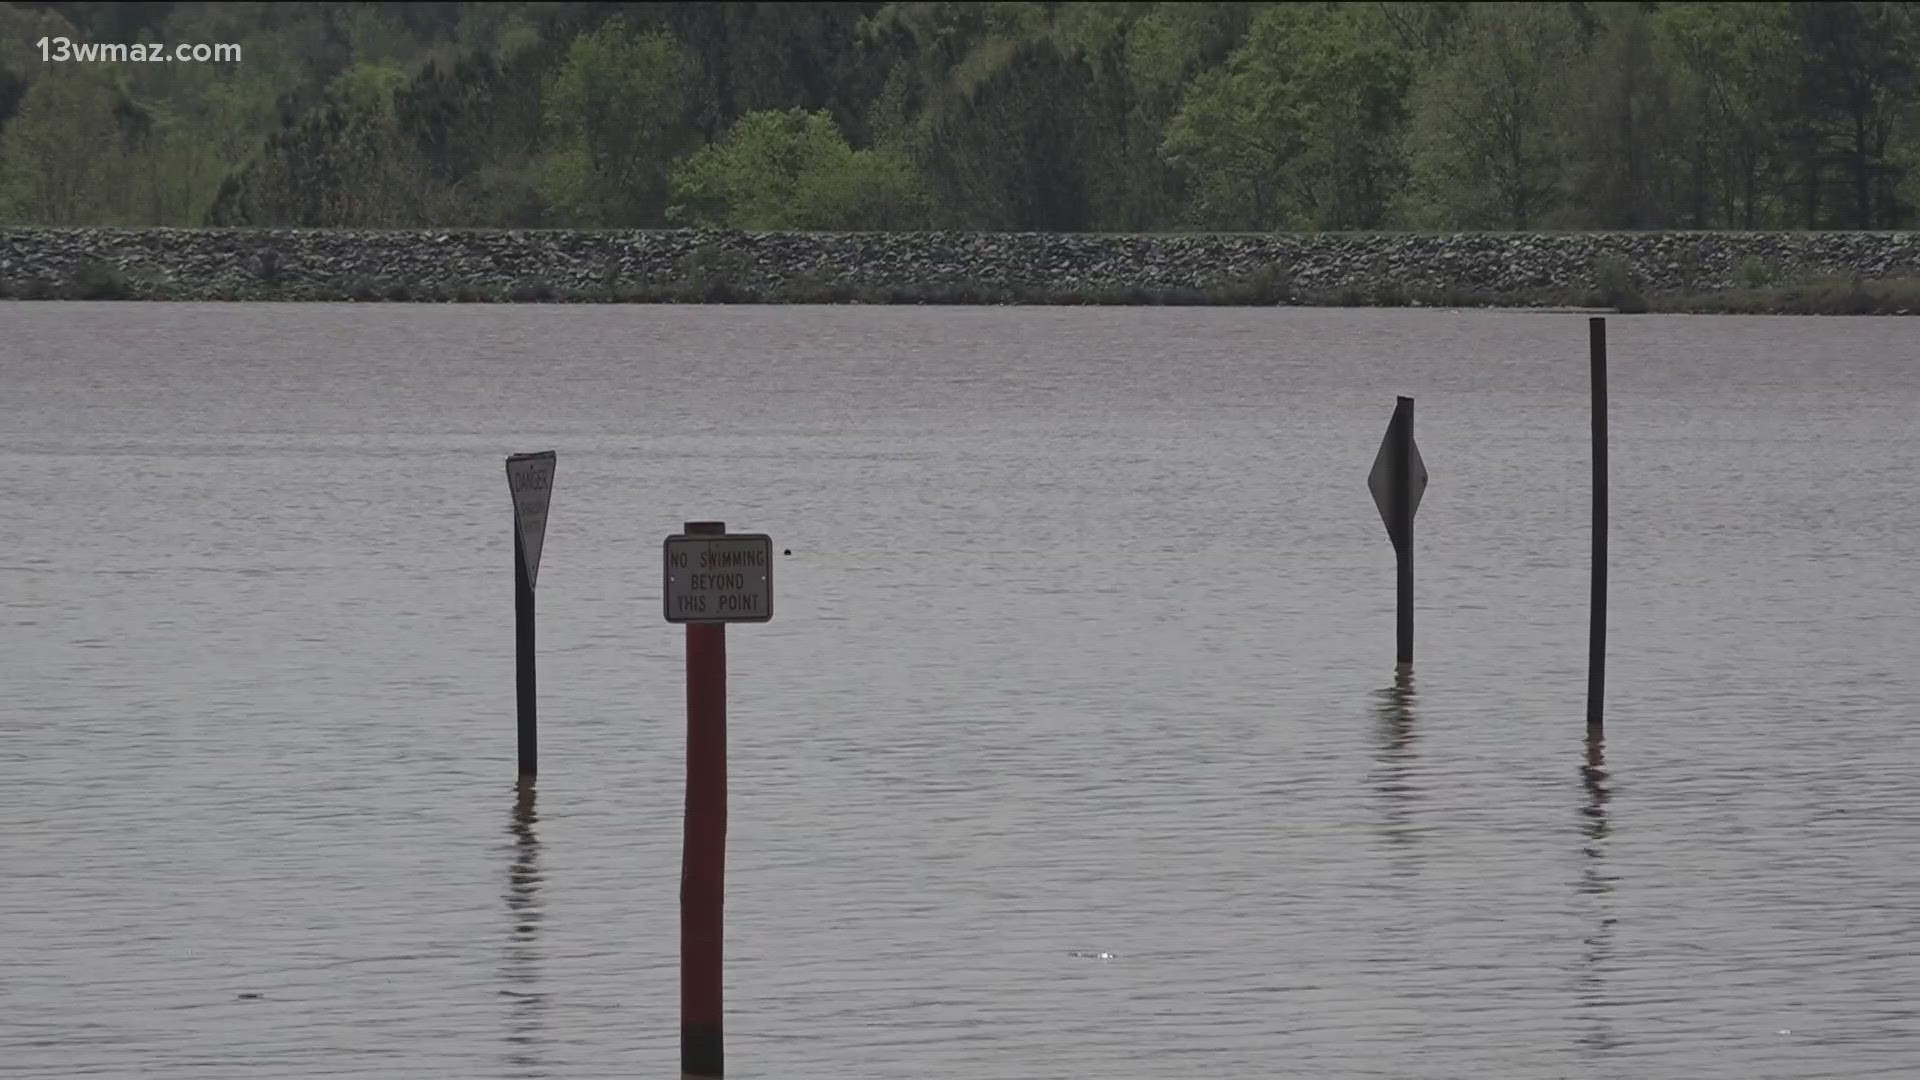 Weekend storms caused high waters on the beach forcing crews to open the lakes dam gates